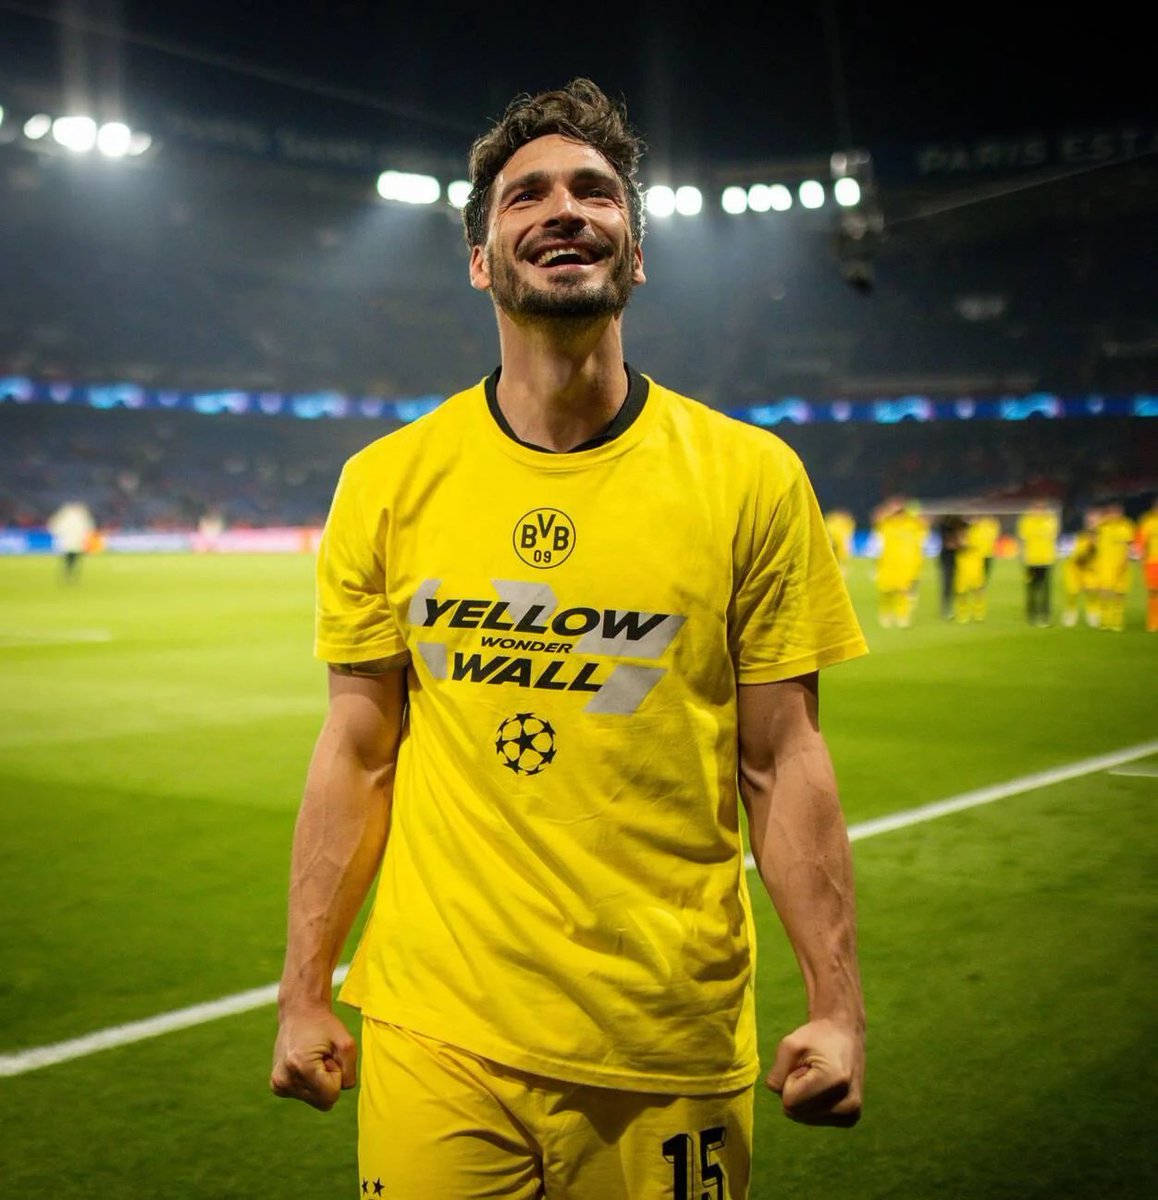 Mats Hummels on playing Real Madrid in the UCL final: 'The idea that both Champions League finals in my career would have been all-German didn't quite excite me. A Champions League final against Real Madrid, that's the biggest club in the world. It's the ultimate.'

Hummels on